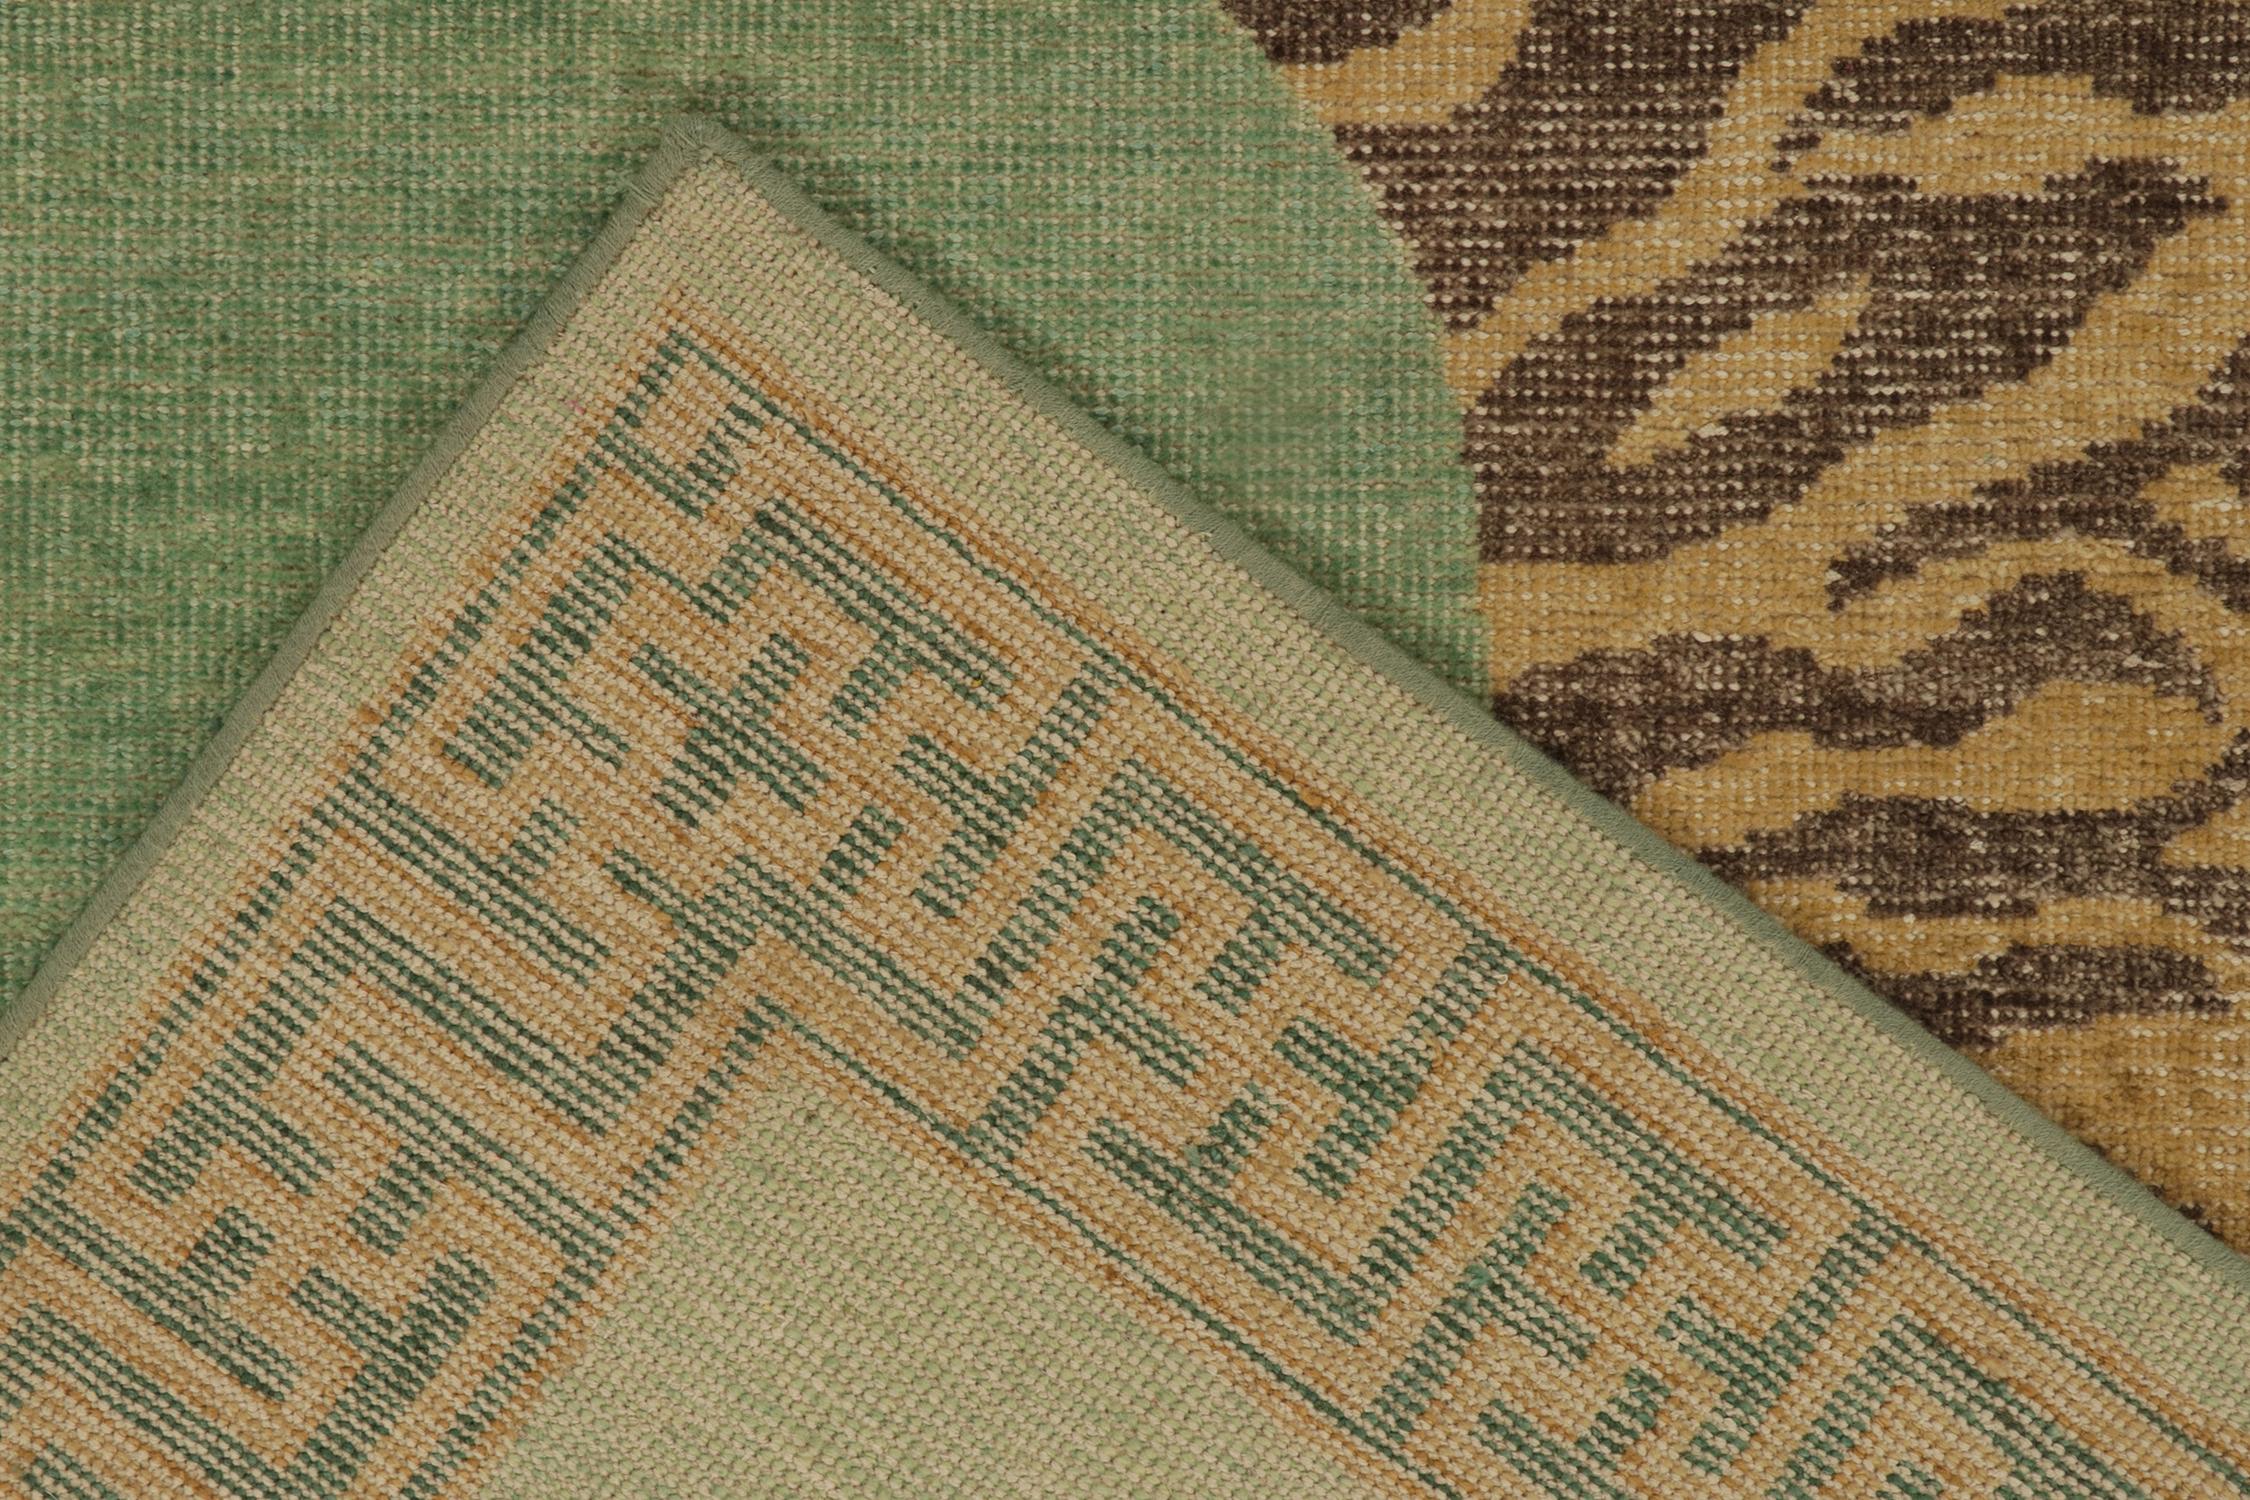 Rug & Kilim’s Distressed Tiger Skin Style Rug in Green, Beige & Black Pictorial  In New Condition For Sale In Long Island City, NY